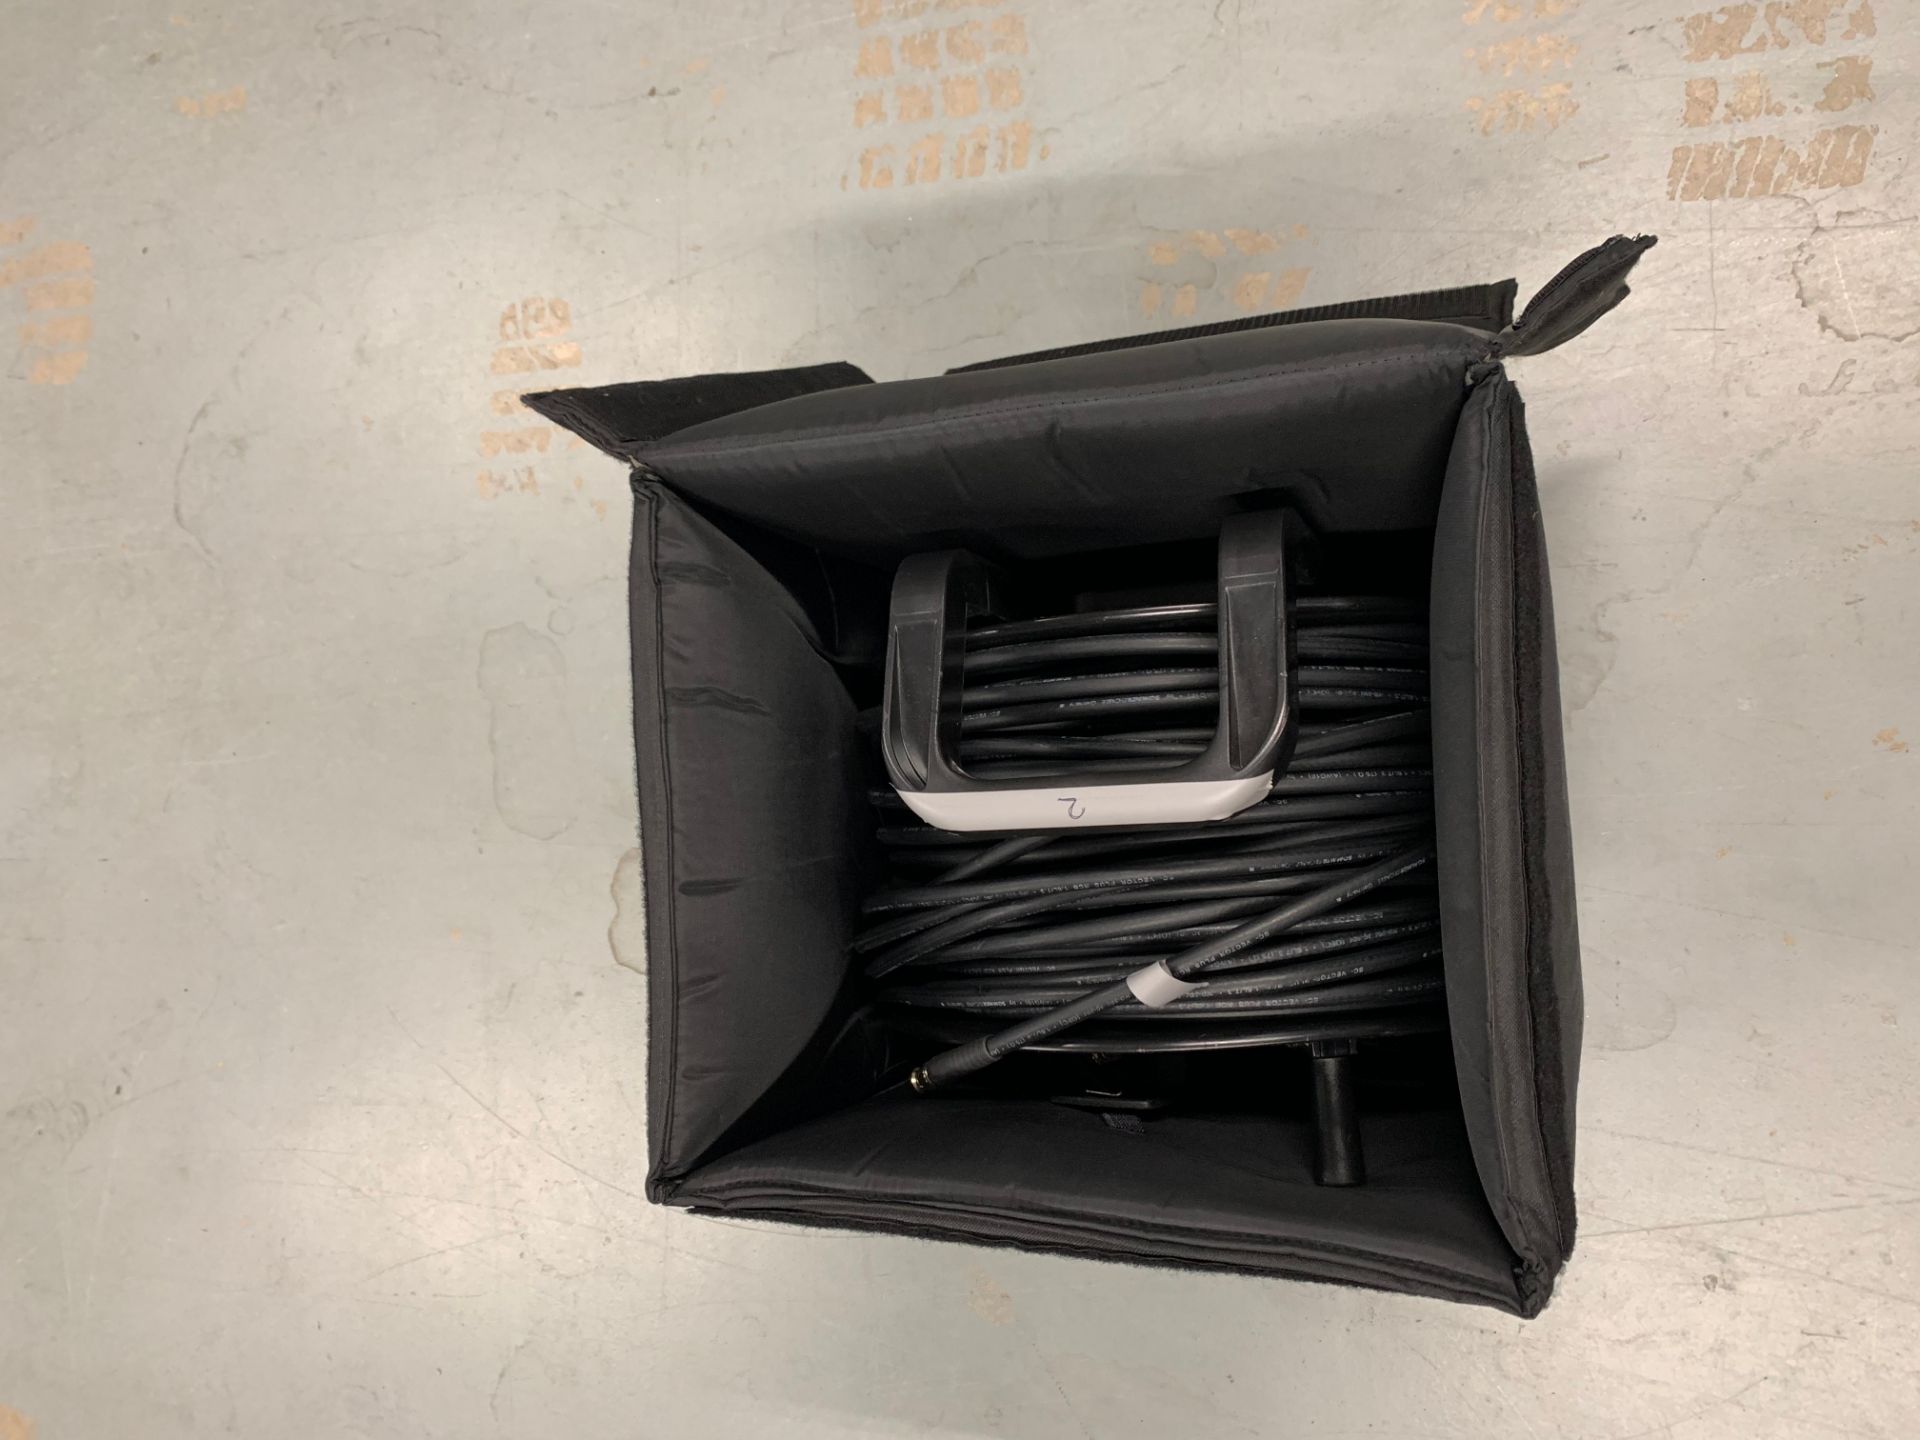 100m SDI Cable on a Drum in Bag